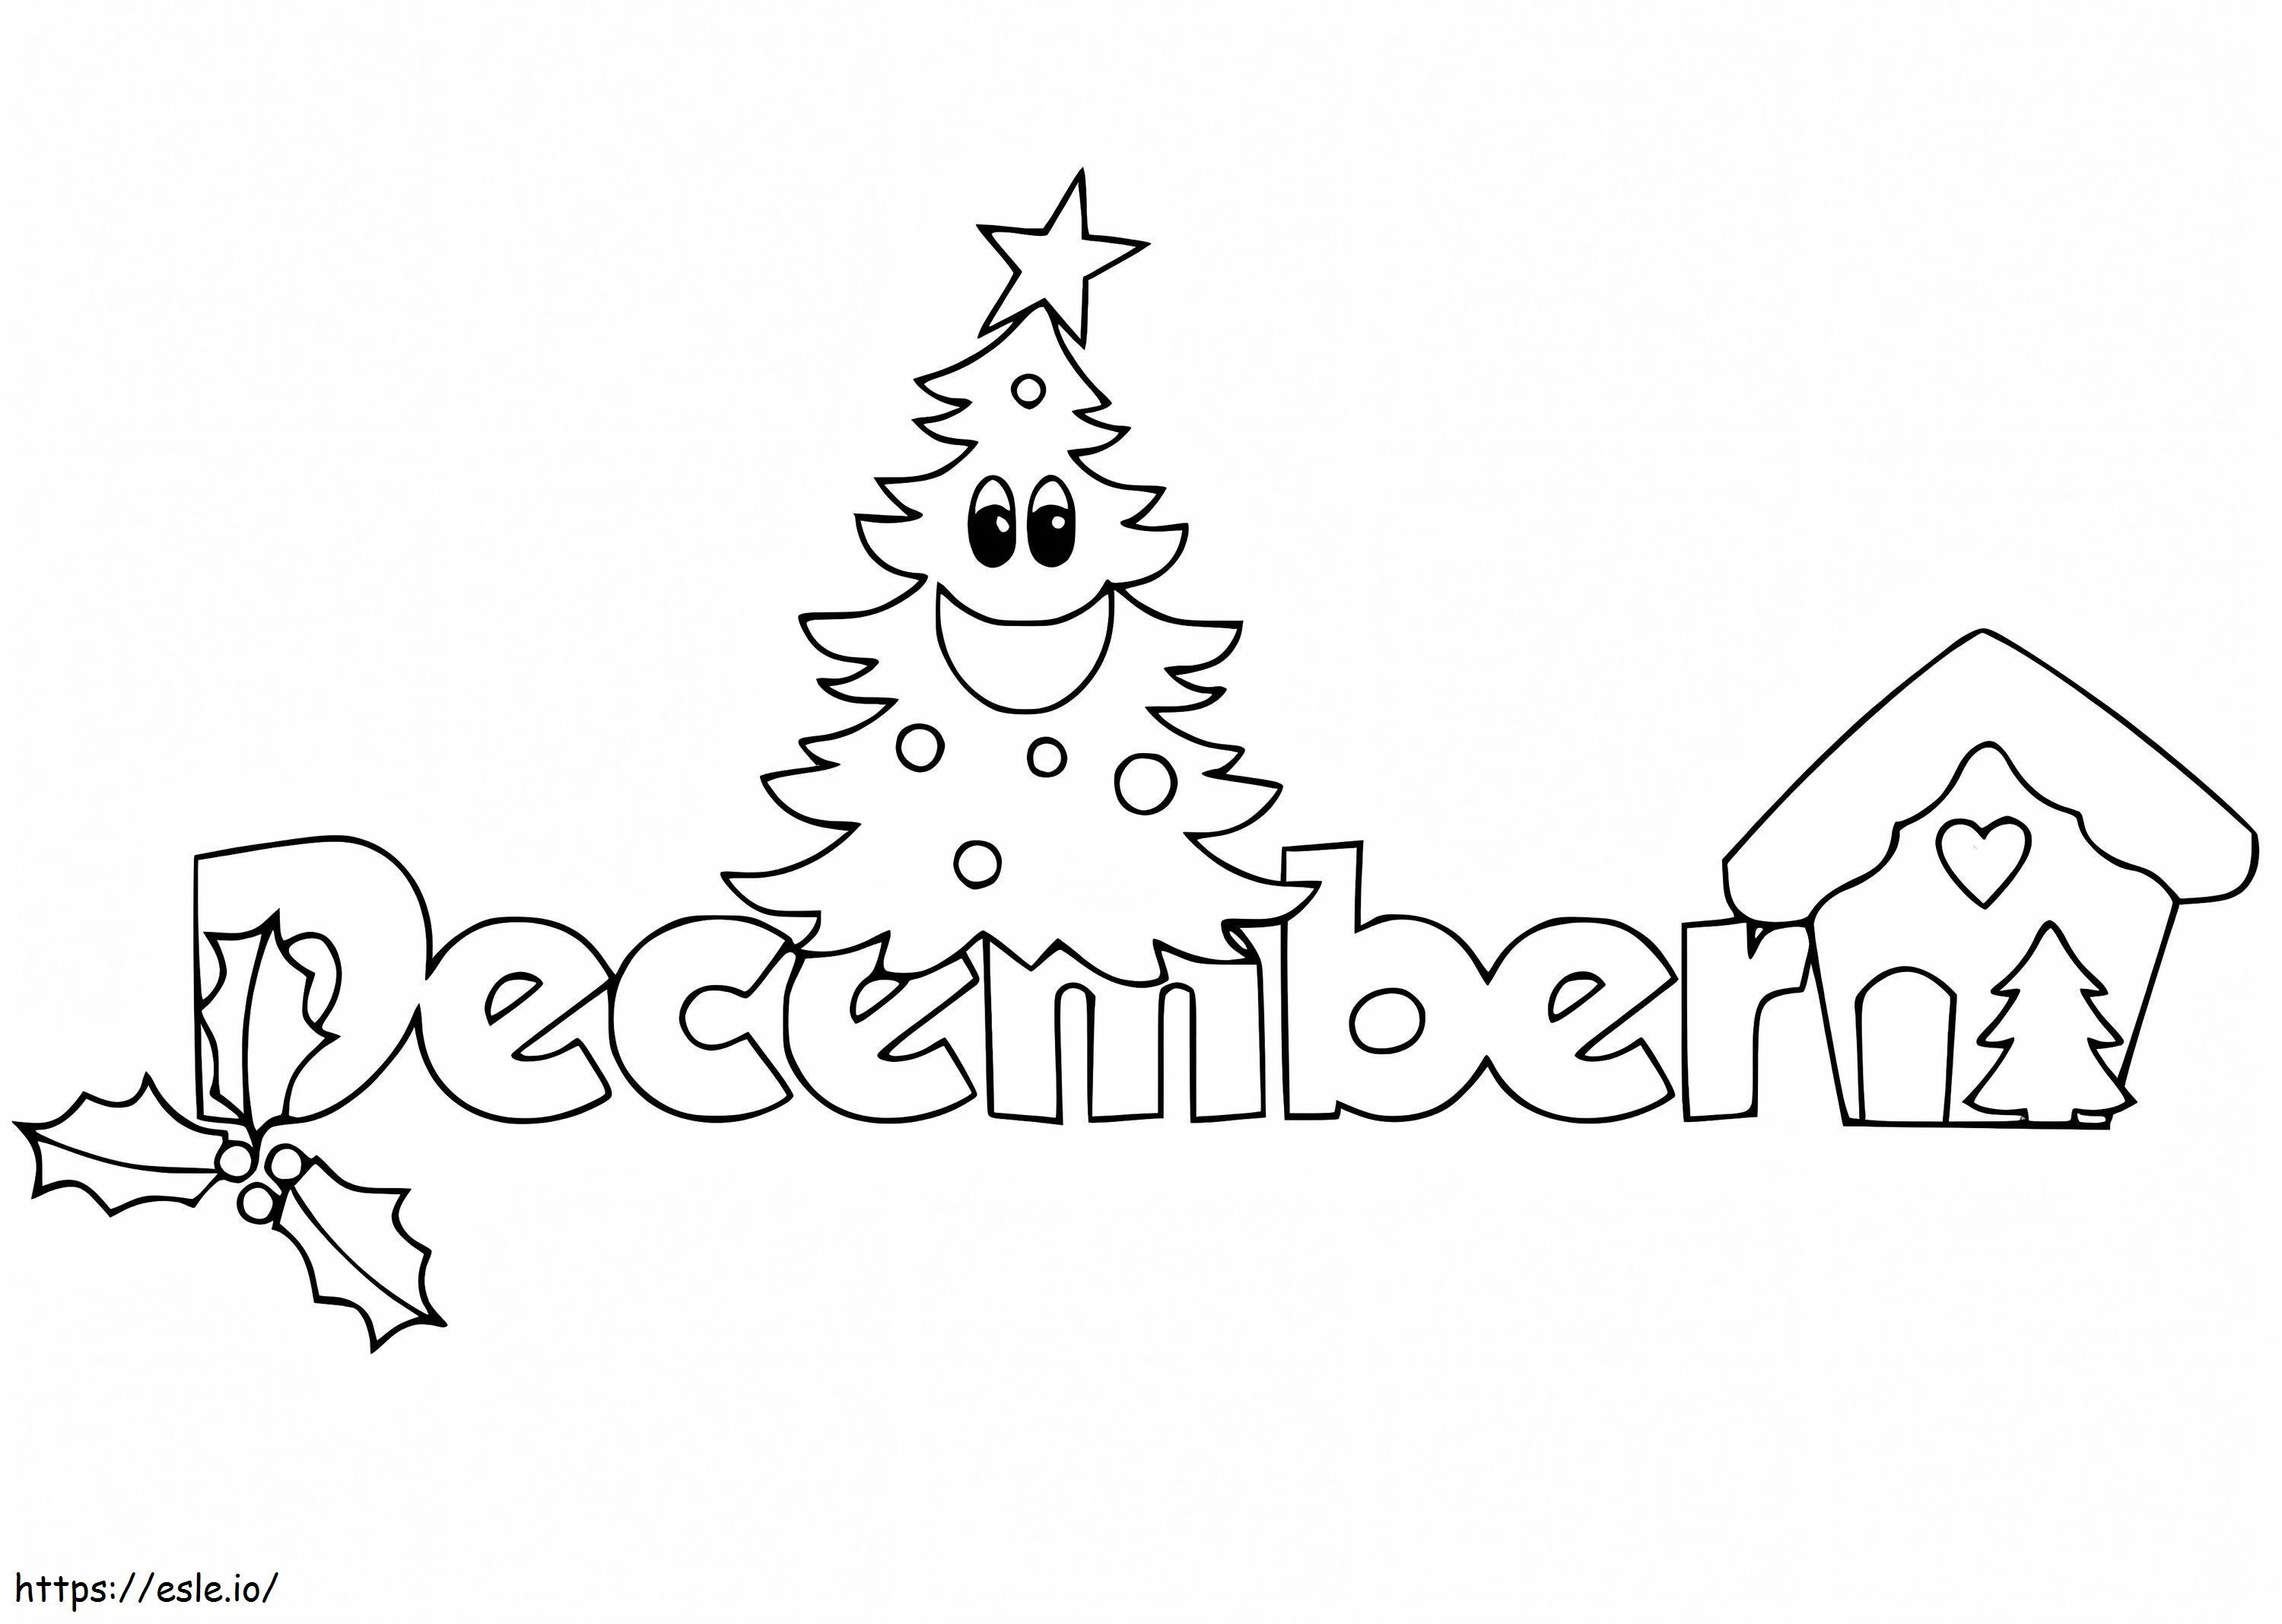 December 2 coloring page